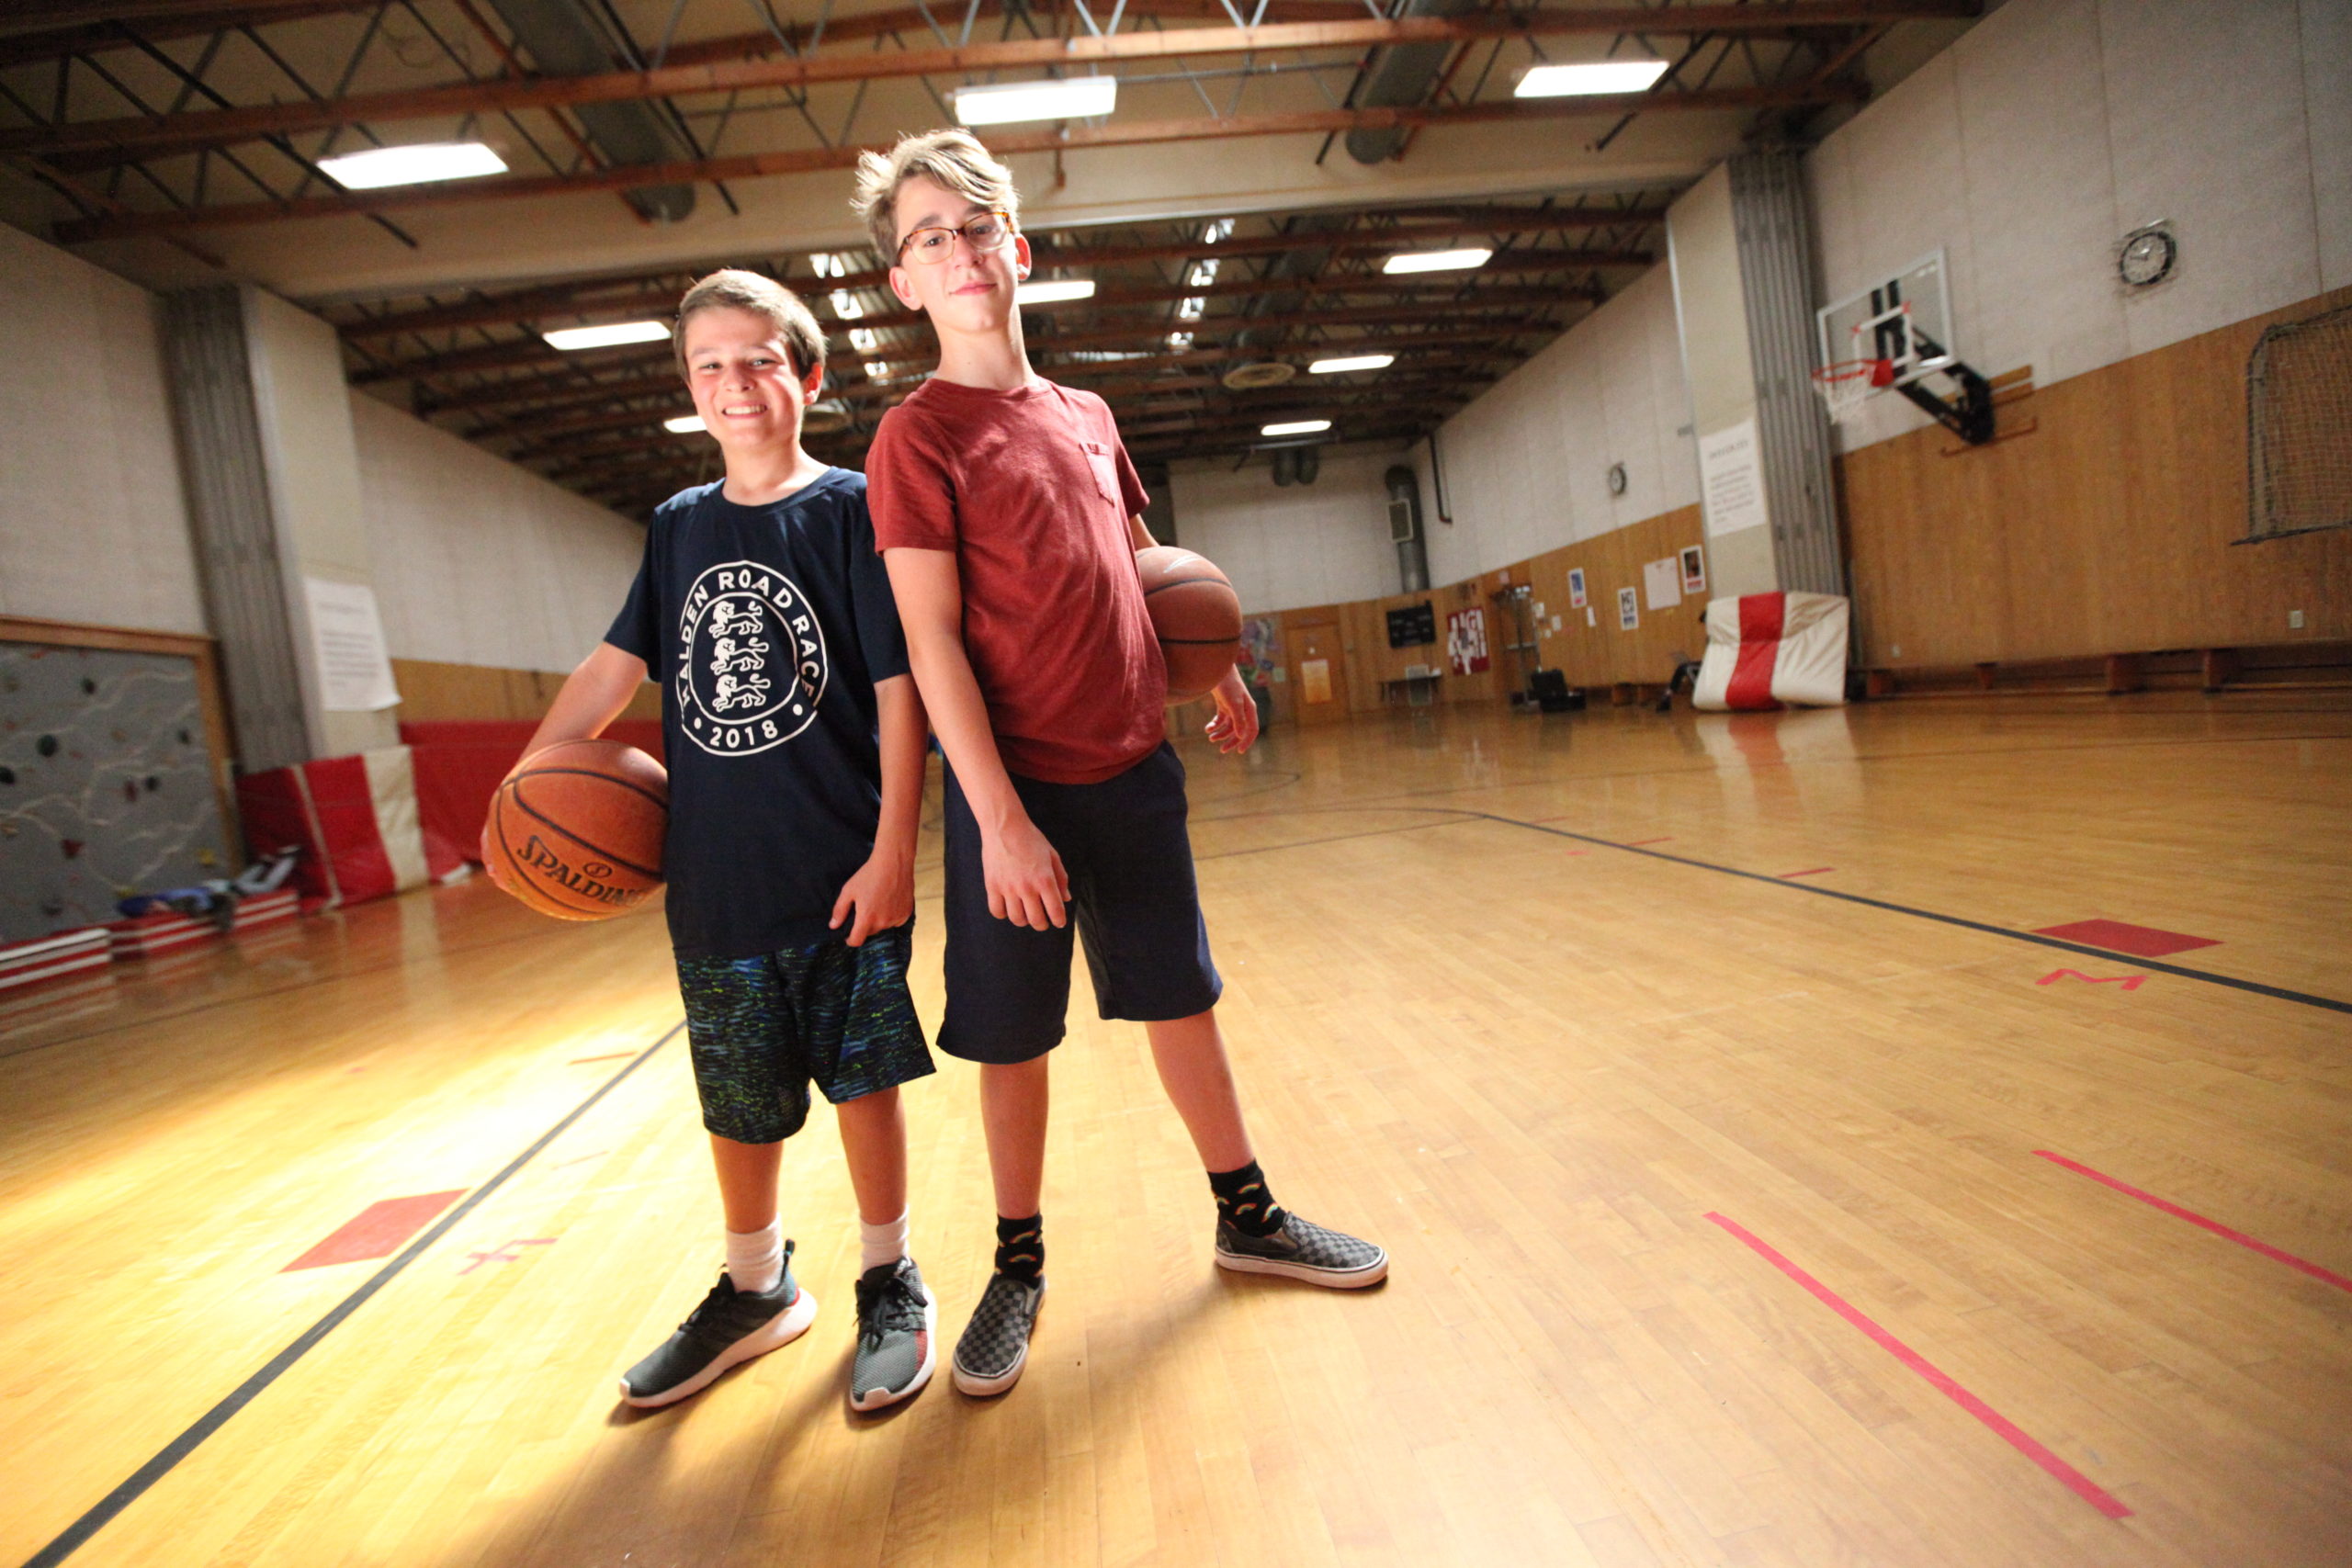 Middle School students pose during basketball in the Gymnasium at Cambridge Friends School